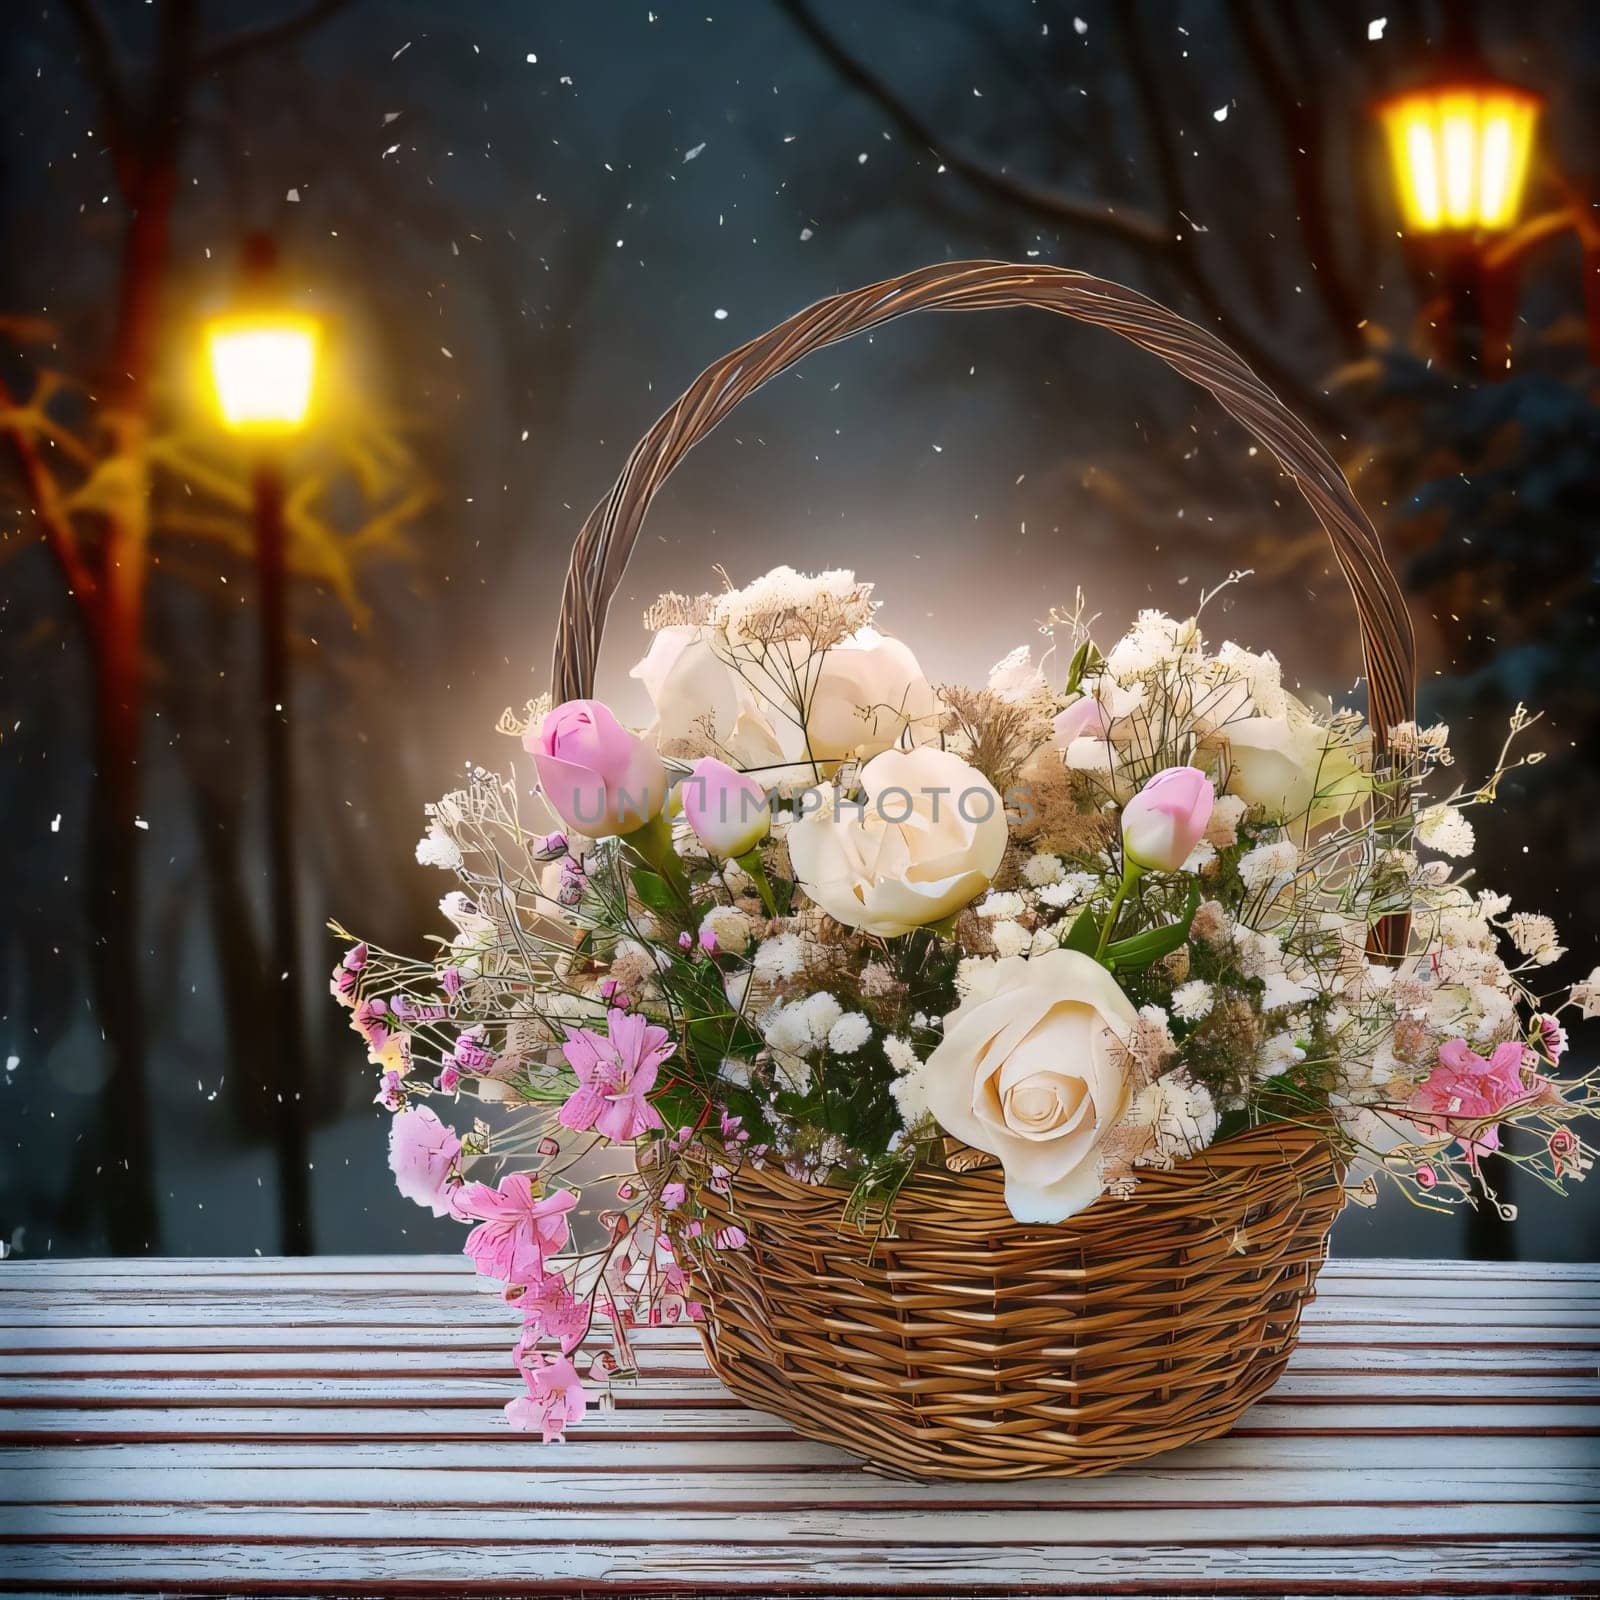 Illustration, wicker basket full of white and pink flowers. Flowering flowers, a symbol of spring, new life. by ThemesS